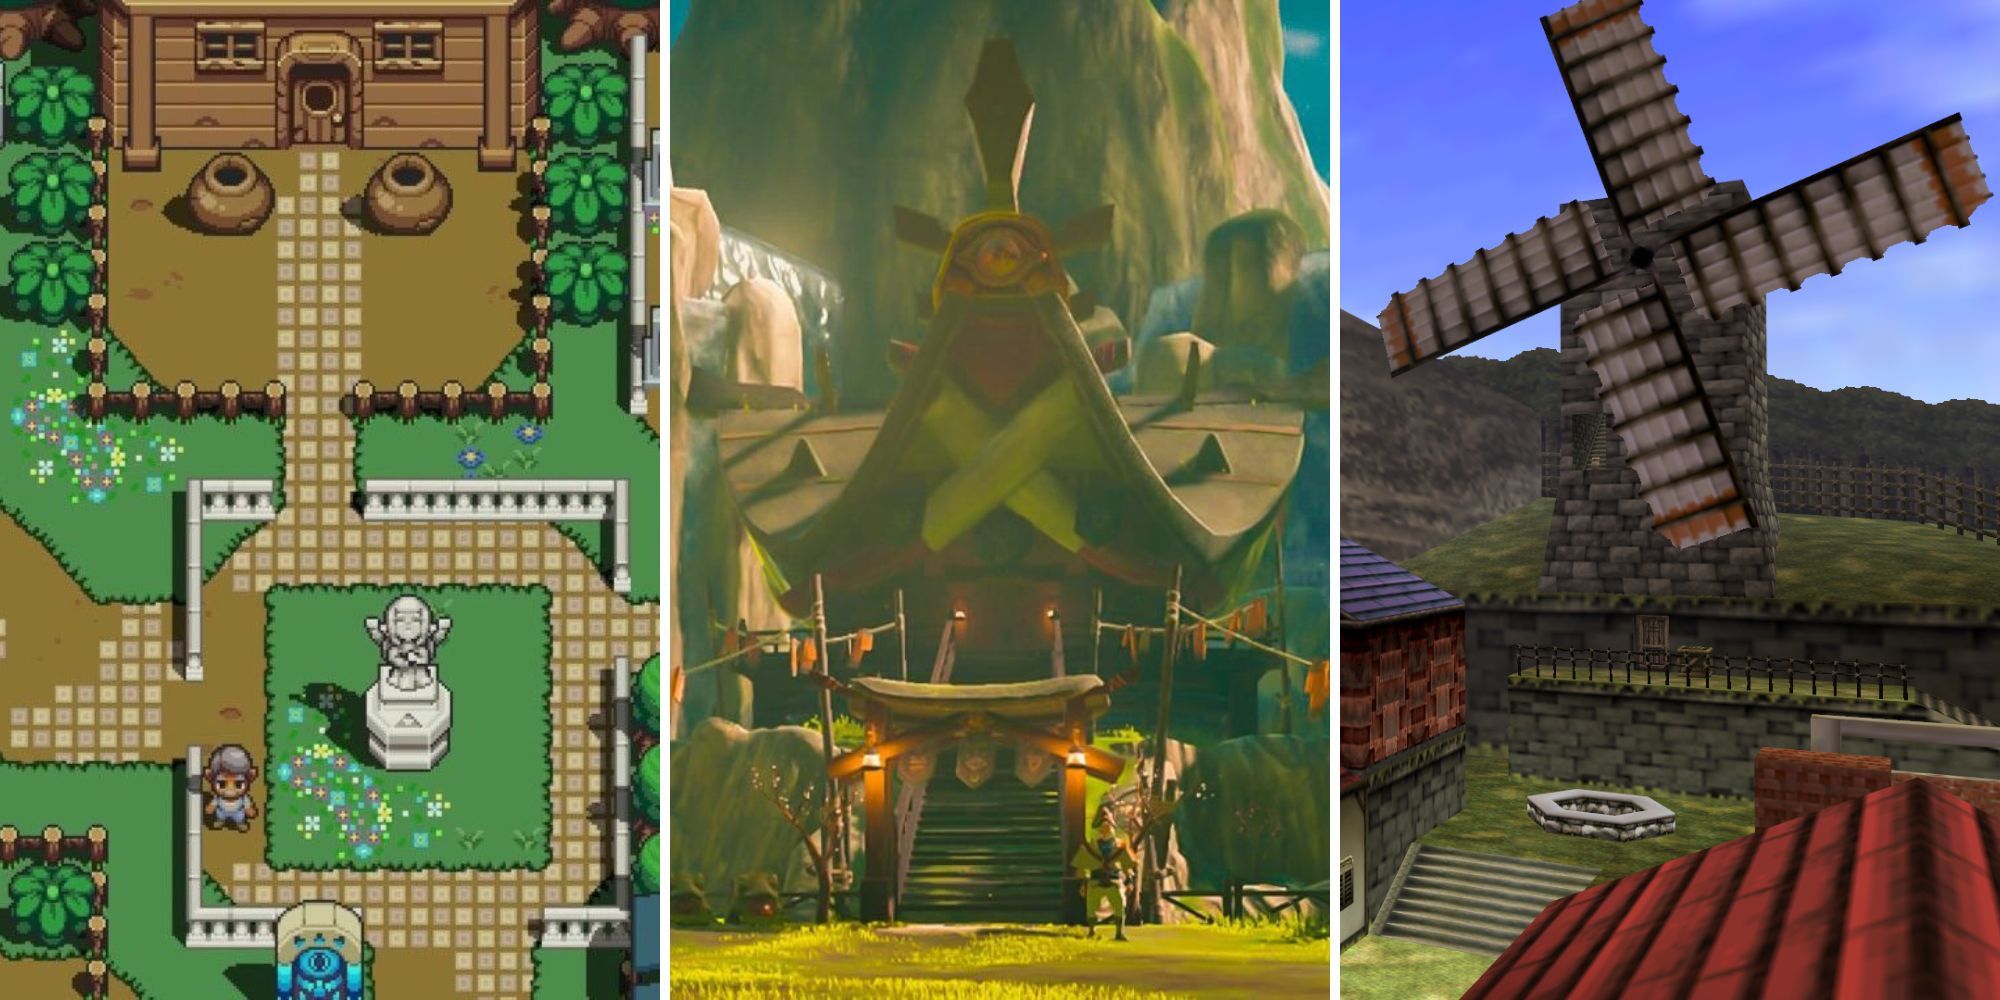 Cadence of Hyrule's Kakariko Village, Impa's House from Breath of the Wild, A giant windmill stands beside a well